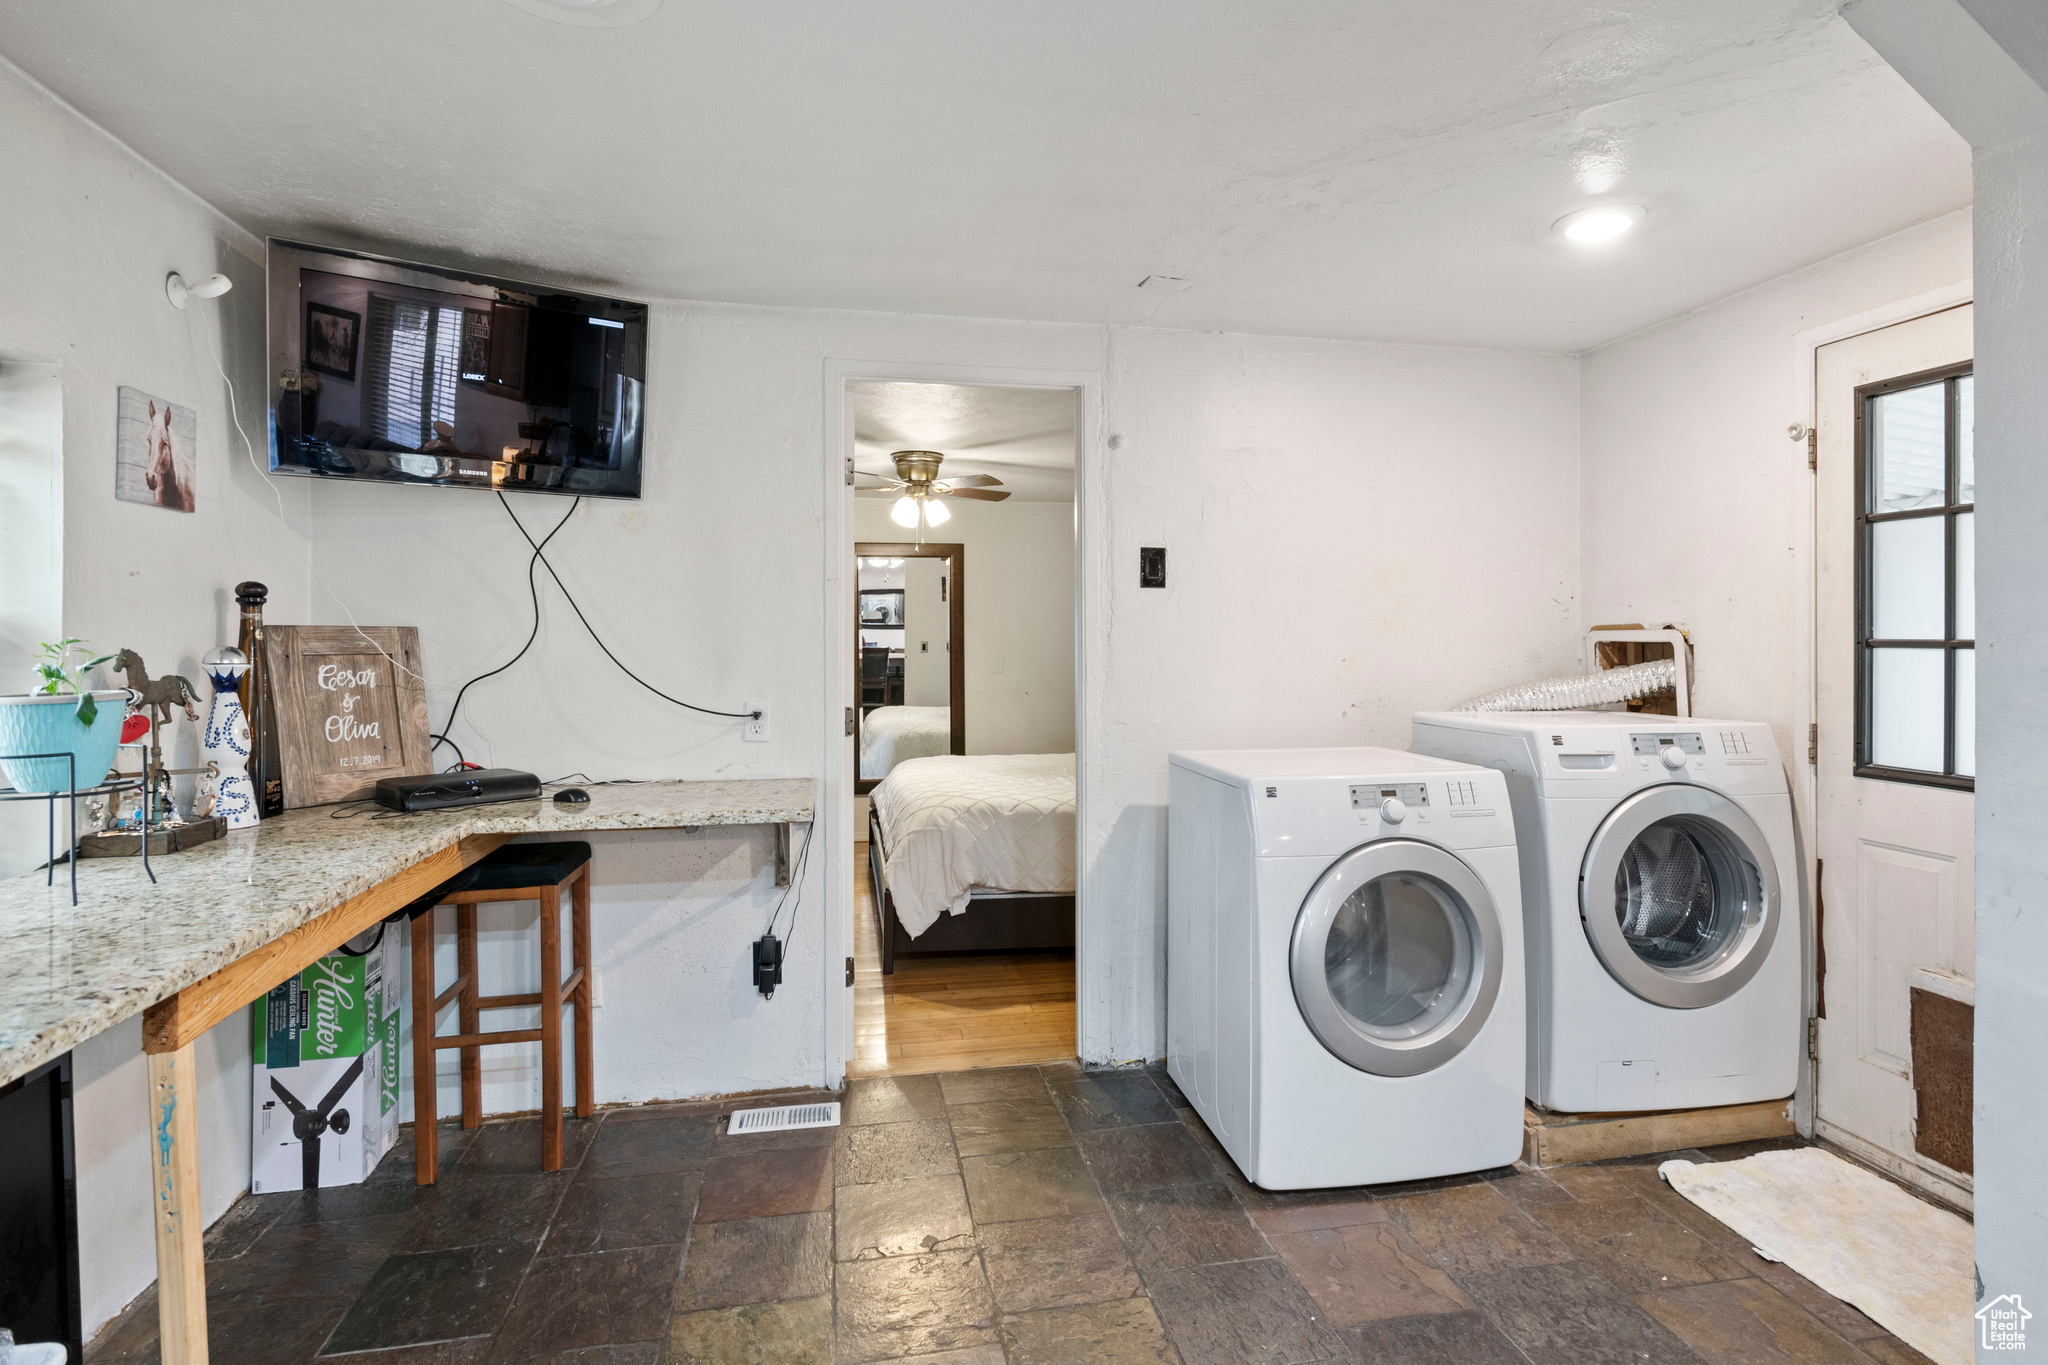 Laundry area featuring dark tile flooring, ceiling fan, and washer and dryer